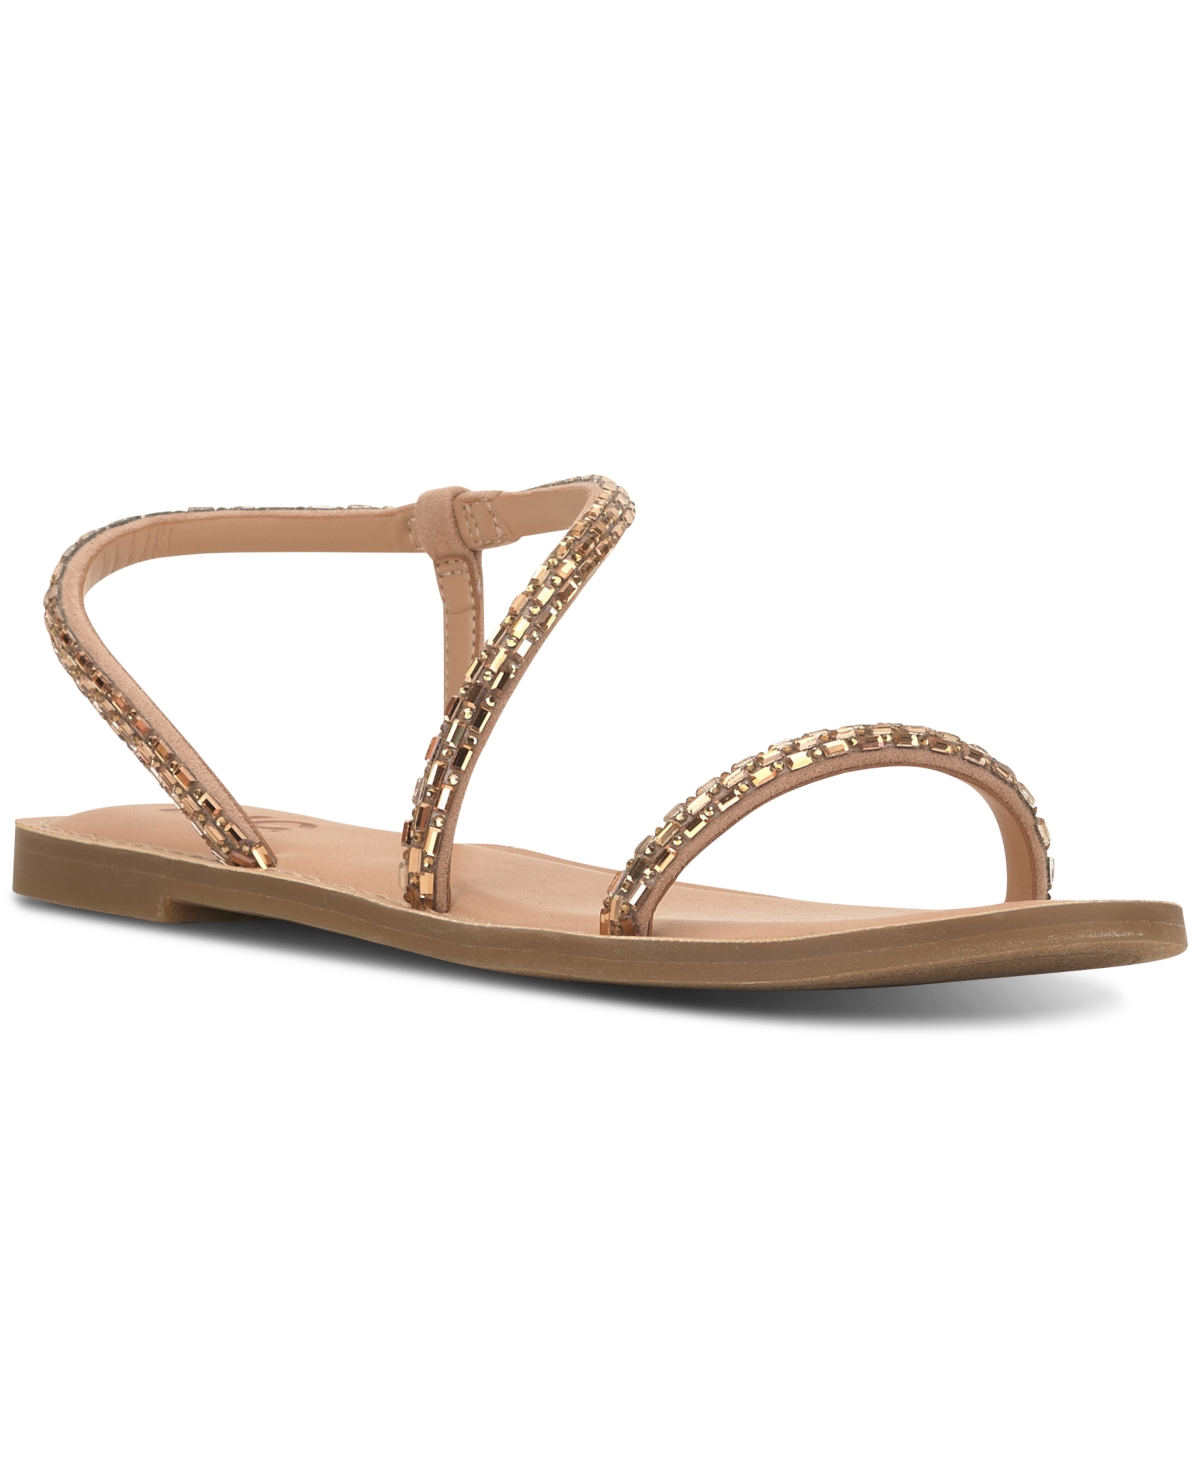 Women's Mahlah Embellished Asymmetrical Sandals, Created for Macy's - Silver Bling